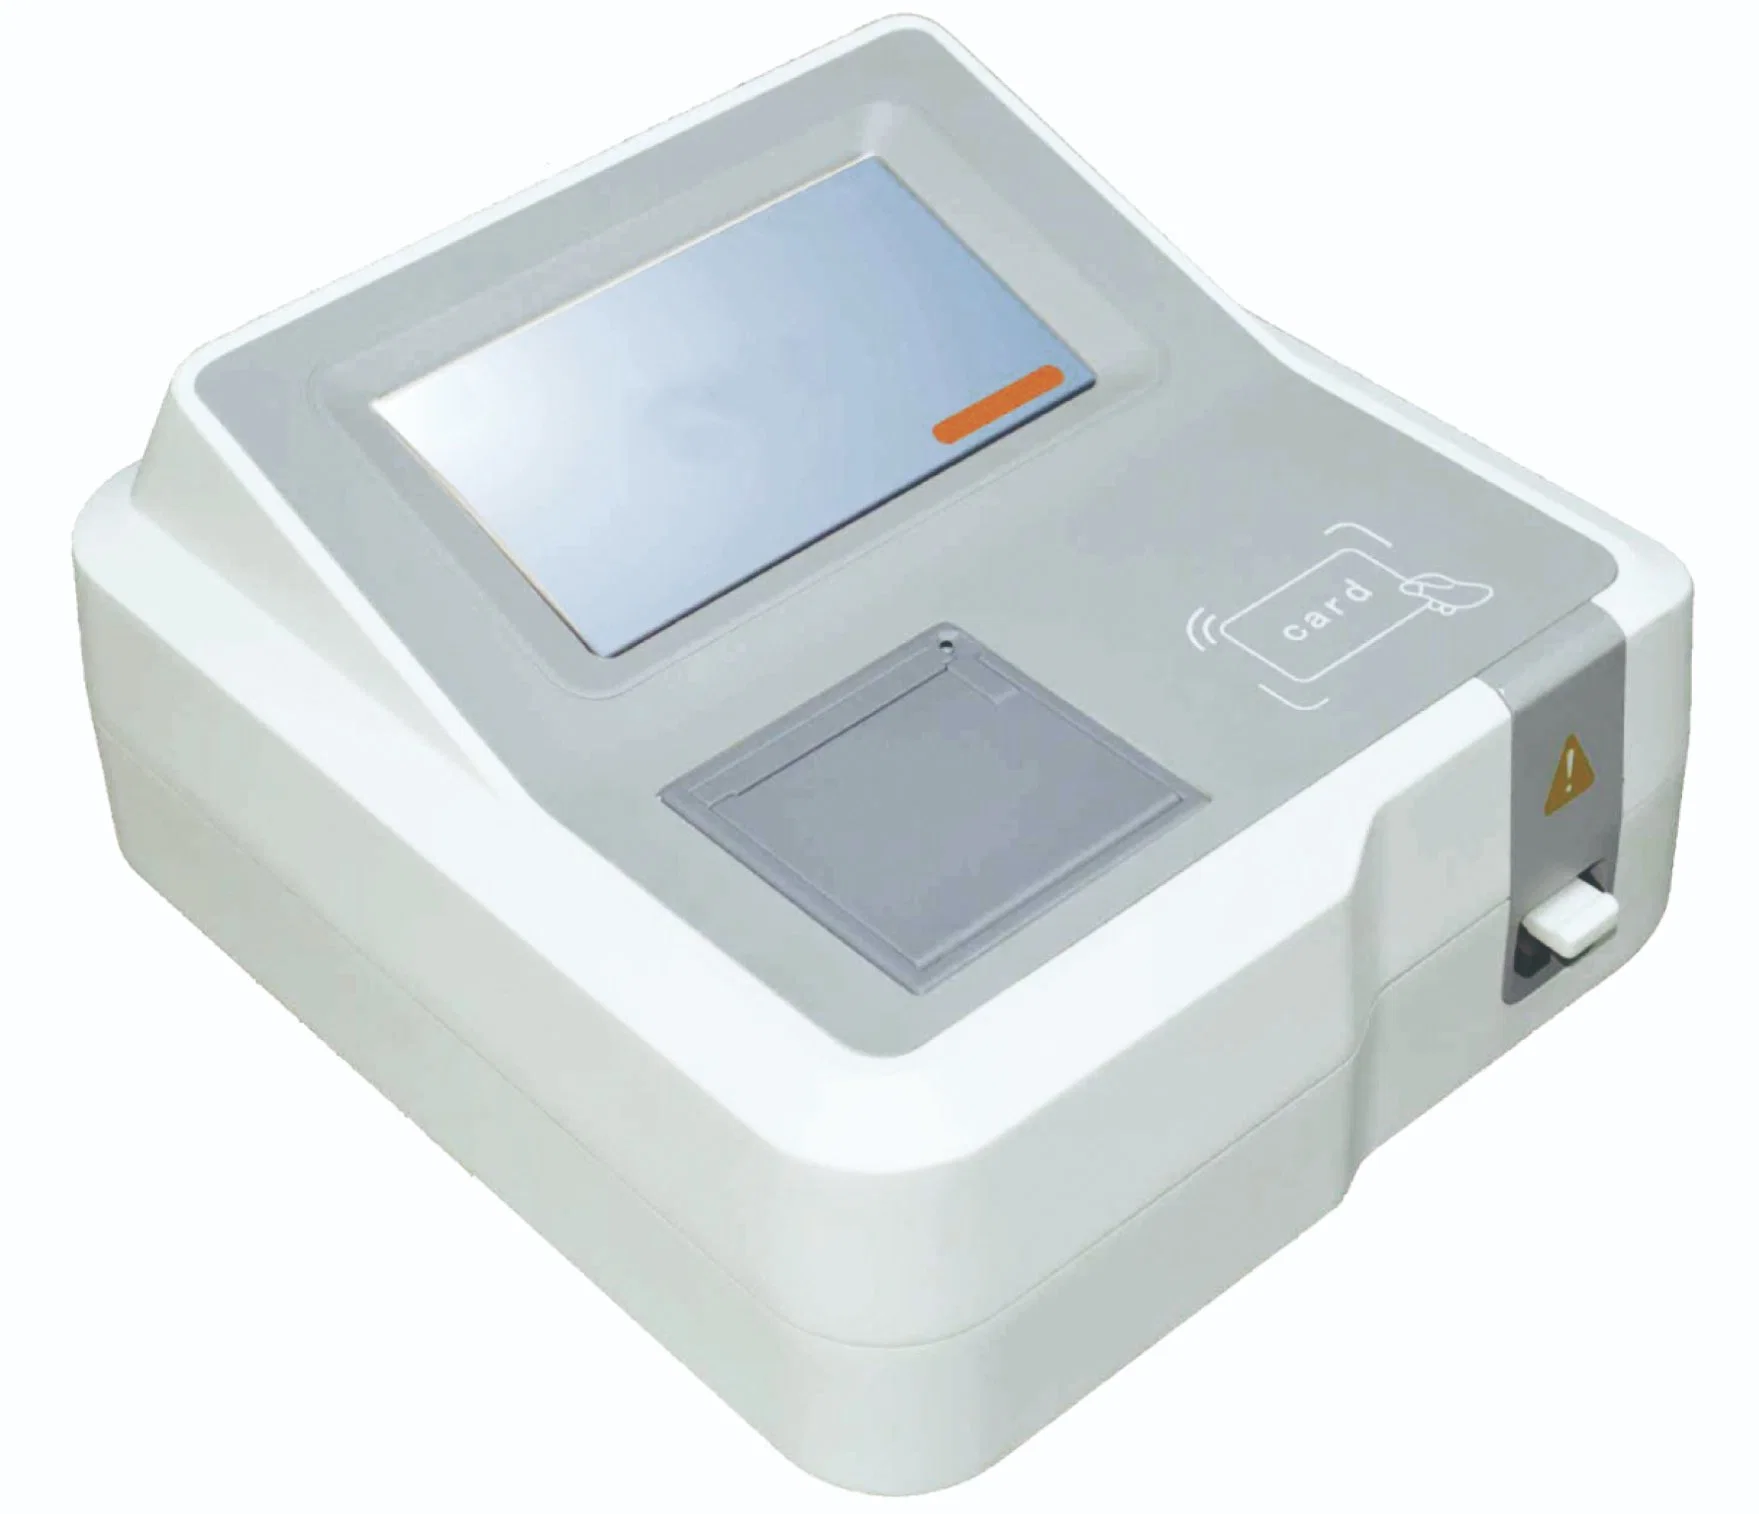 Lab Medical Equipment Fully Automated Test Kit Reader Auto Portable Analyzer for Hospital Clinic